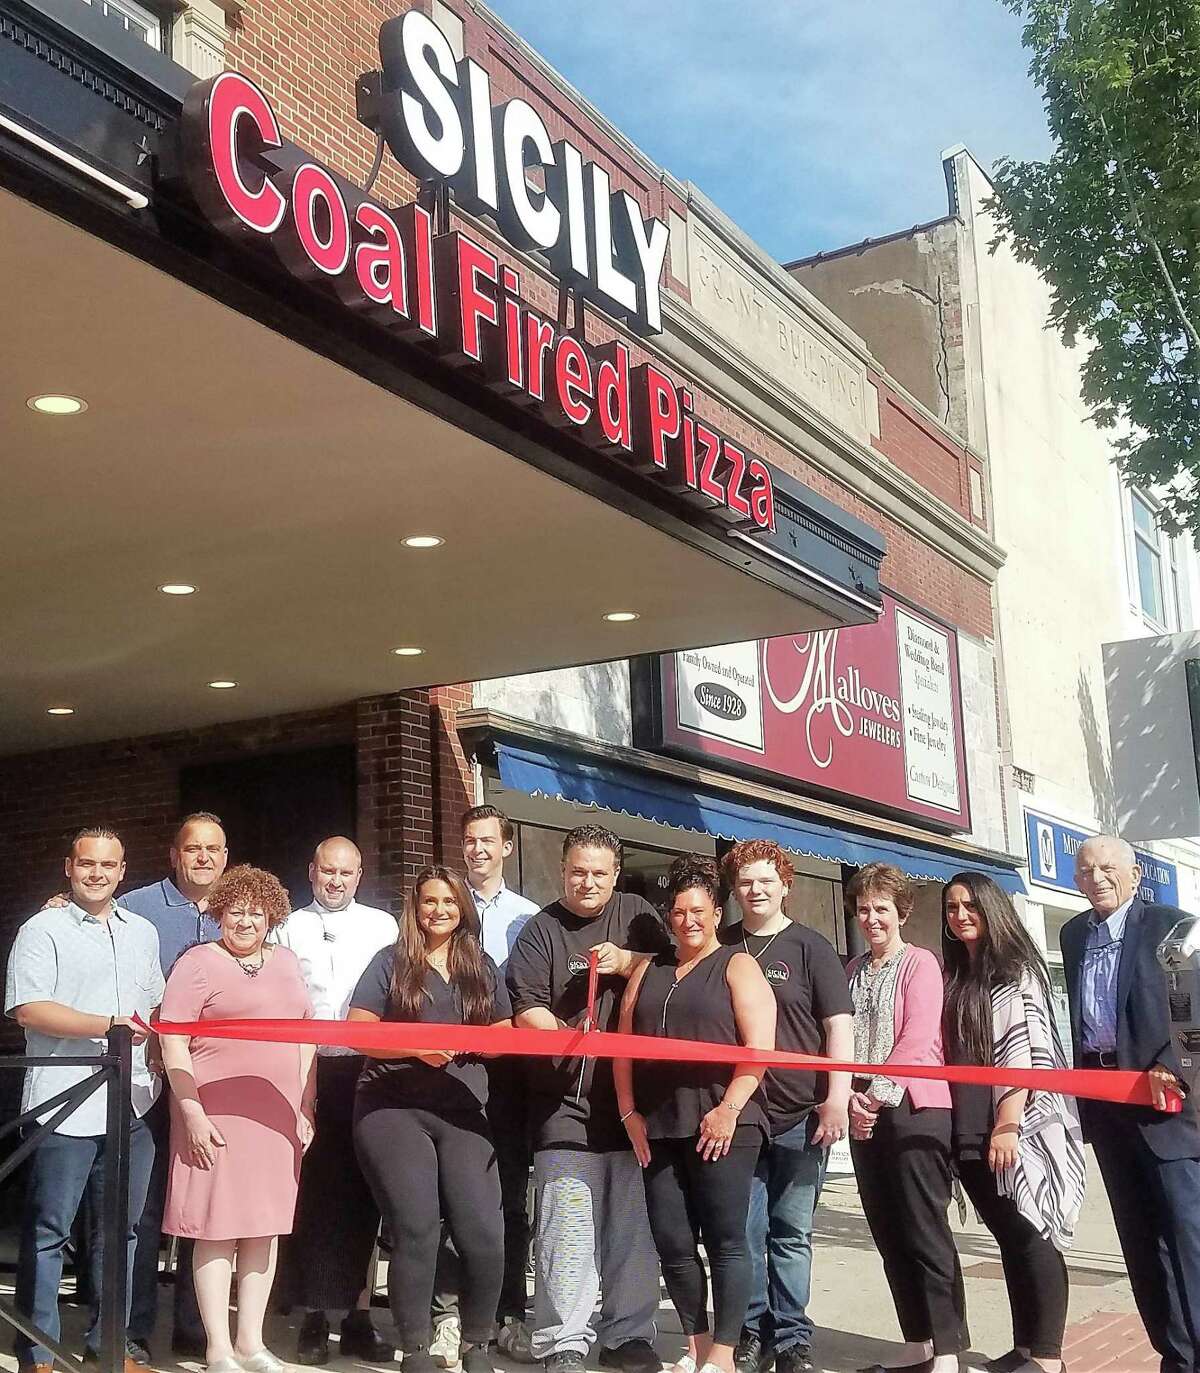 Sicily Coal Fired Pizza in Middletown celebrated its grand opening June 28, 2021, on Main Street.